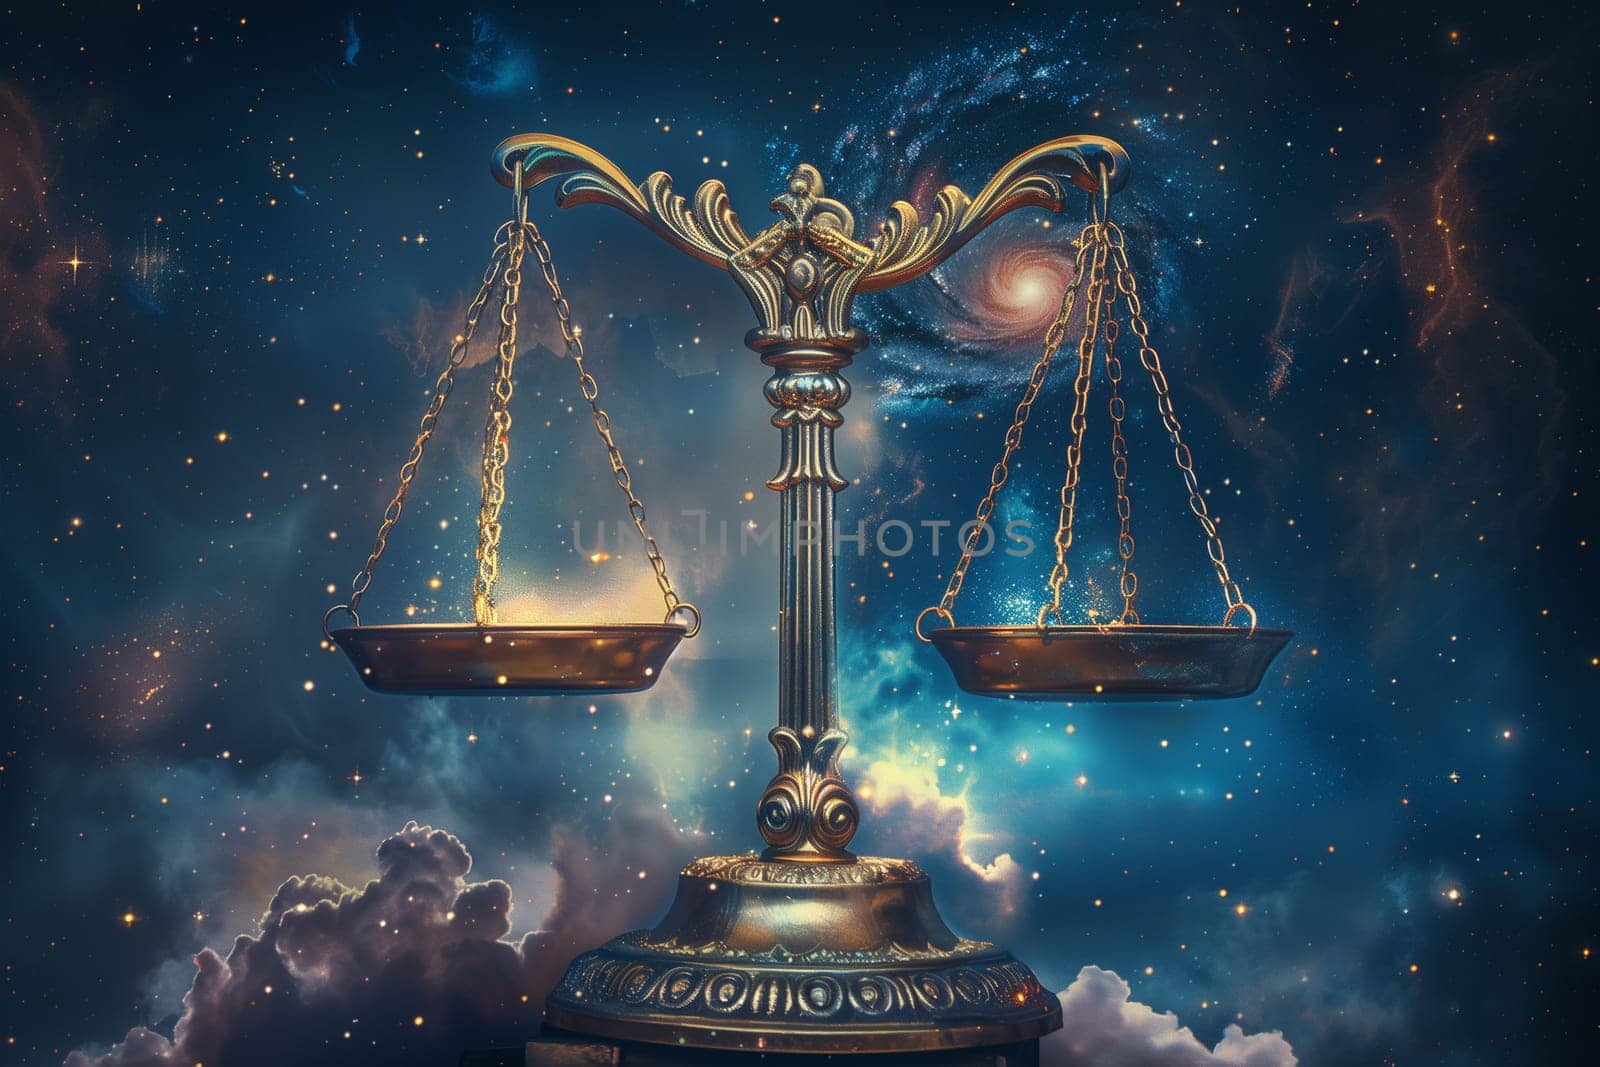 The Libra zodiac sign appears in the sky surrounded by swirling clouds, creating a mystical and heavenly scene.